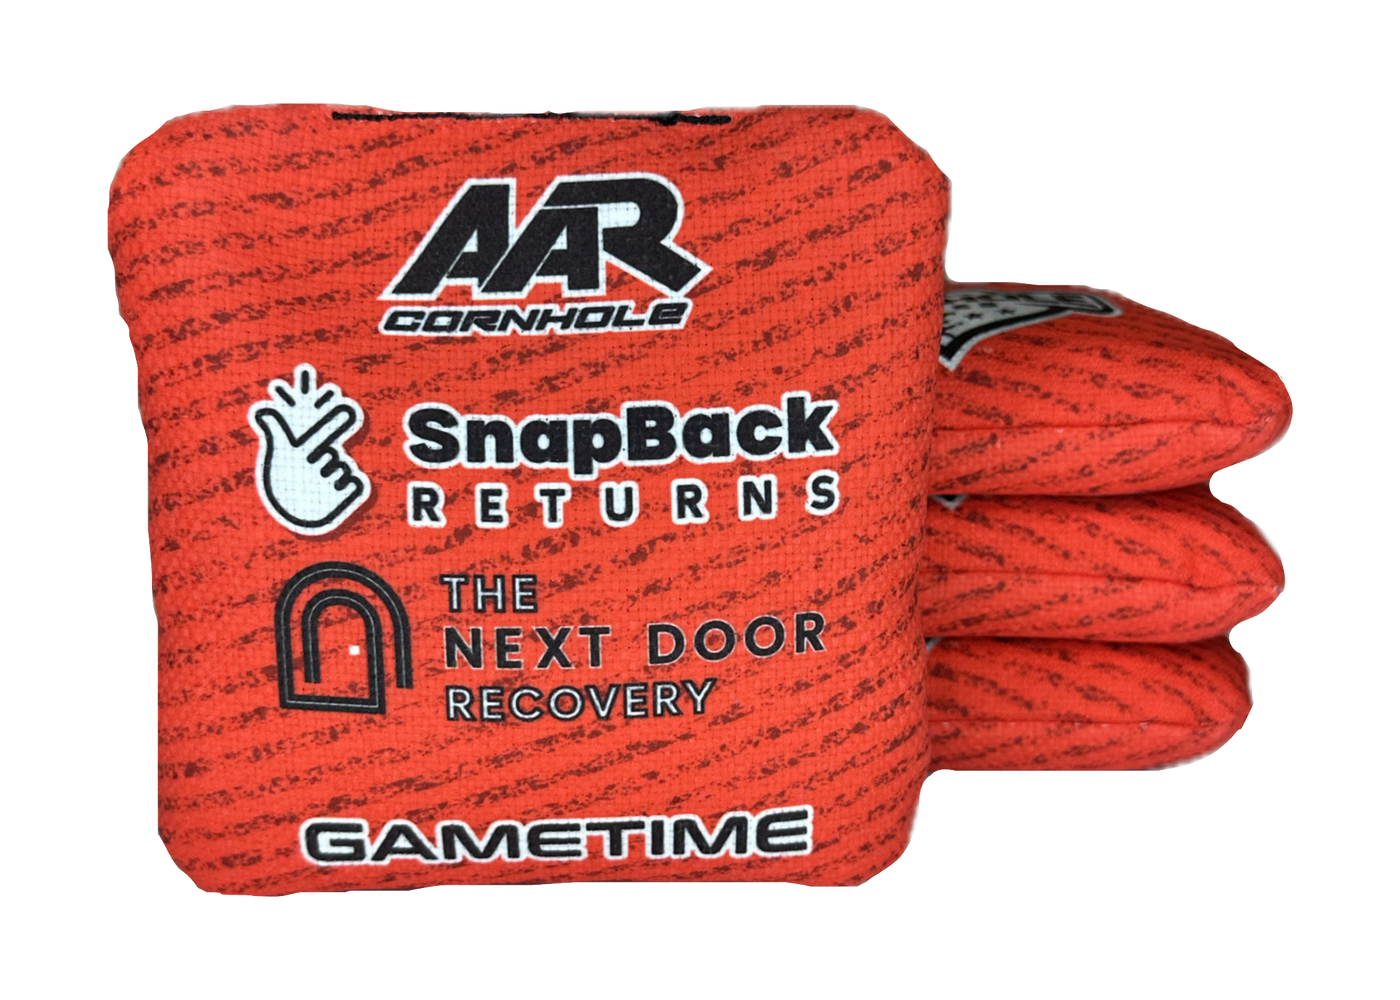 2024 SuperHole V Bags - The Next Door Recovery - Blaine Rosier / DaQuan Jones Edition - ACL Pro Stamped - SET OF 4